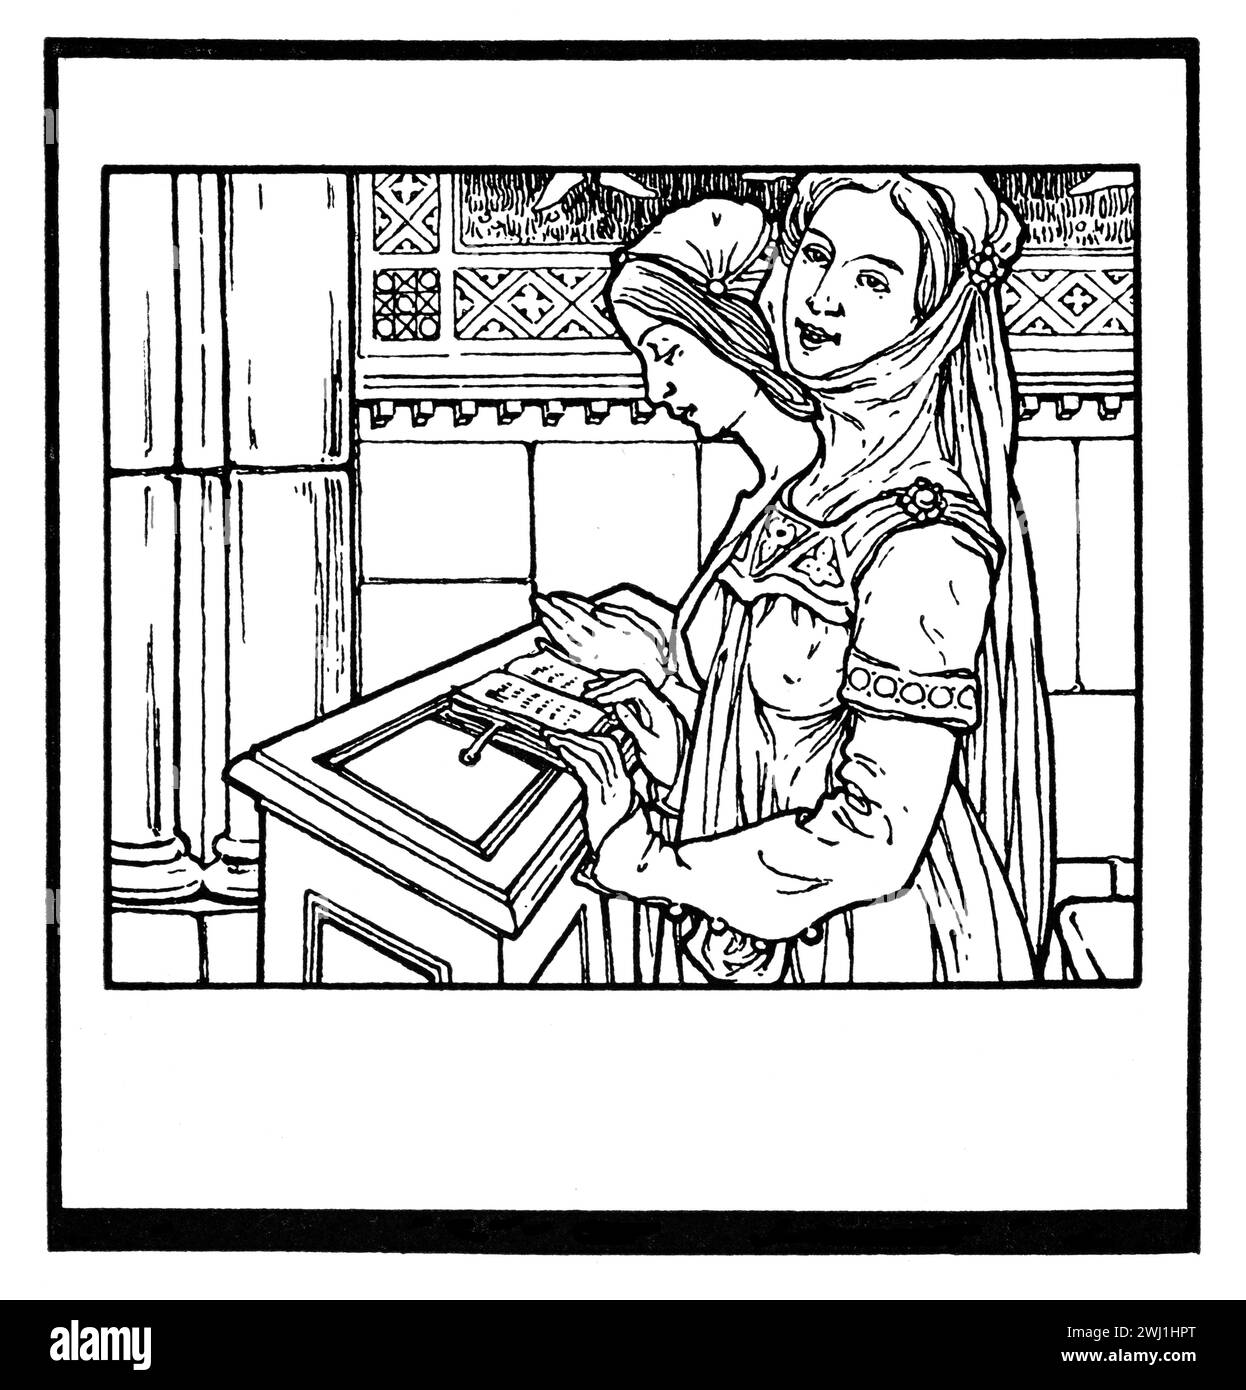 1905 romantic, illustration of medieval women at reading lectern by Bolognese, graphic artist, Alfredo Baruffi Stock Photo